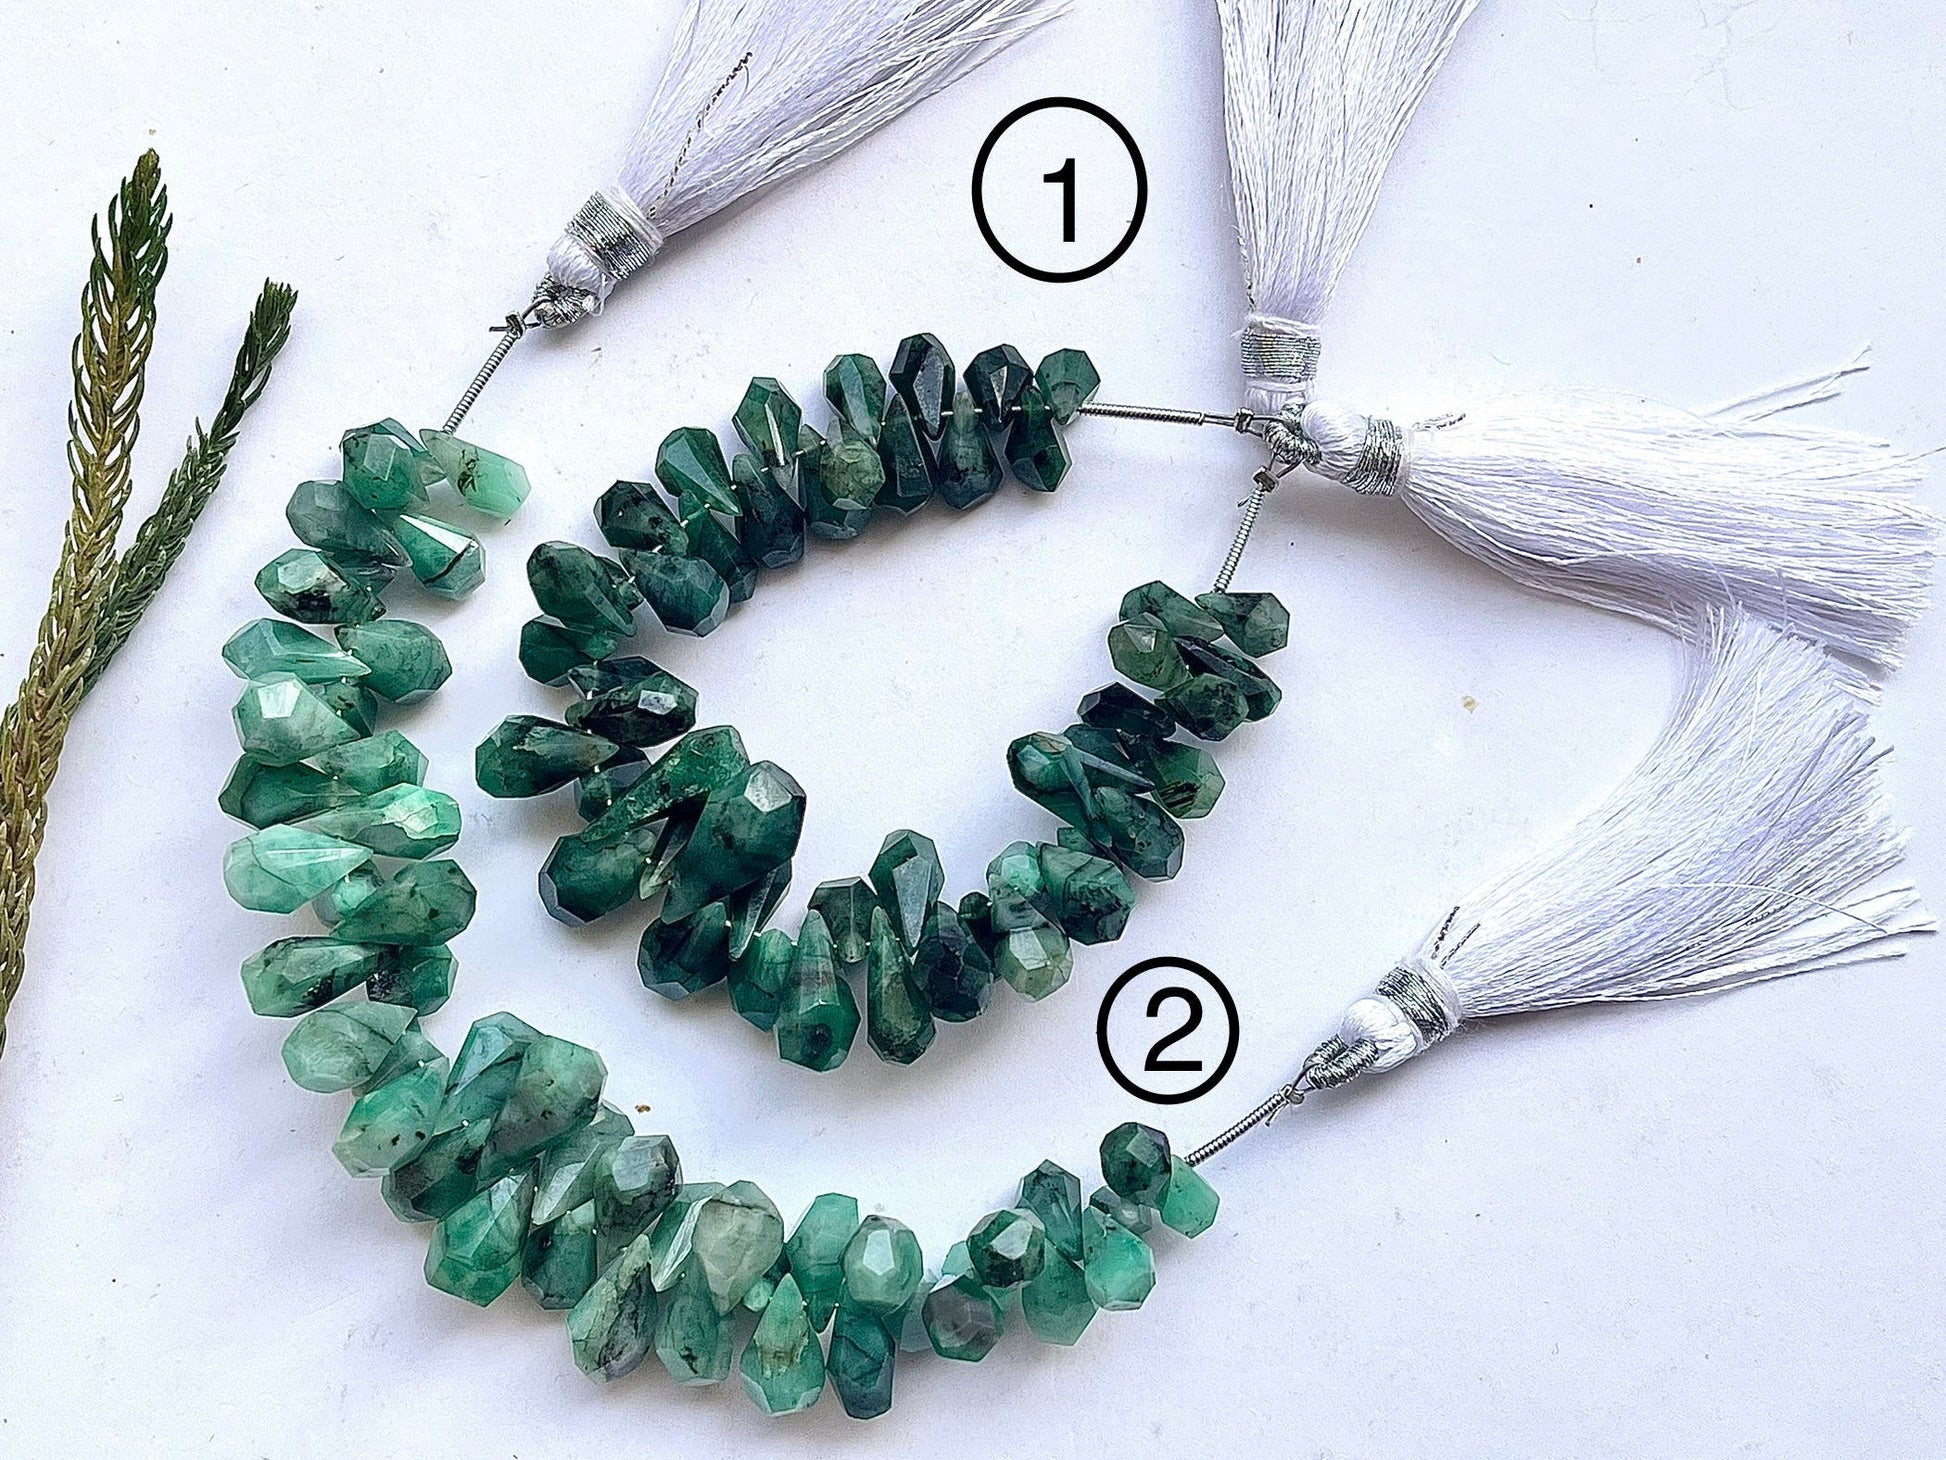 Emerald Tumble Shape Drops, Emerald faceted drops, Emerald Tumble Drops, Emerald Beads, Emerald tumble beads Beadsforyourjewelry